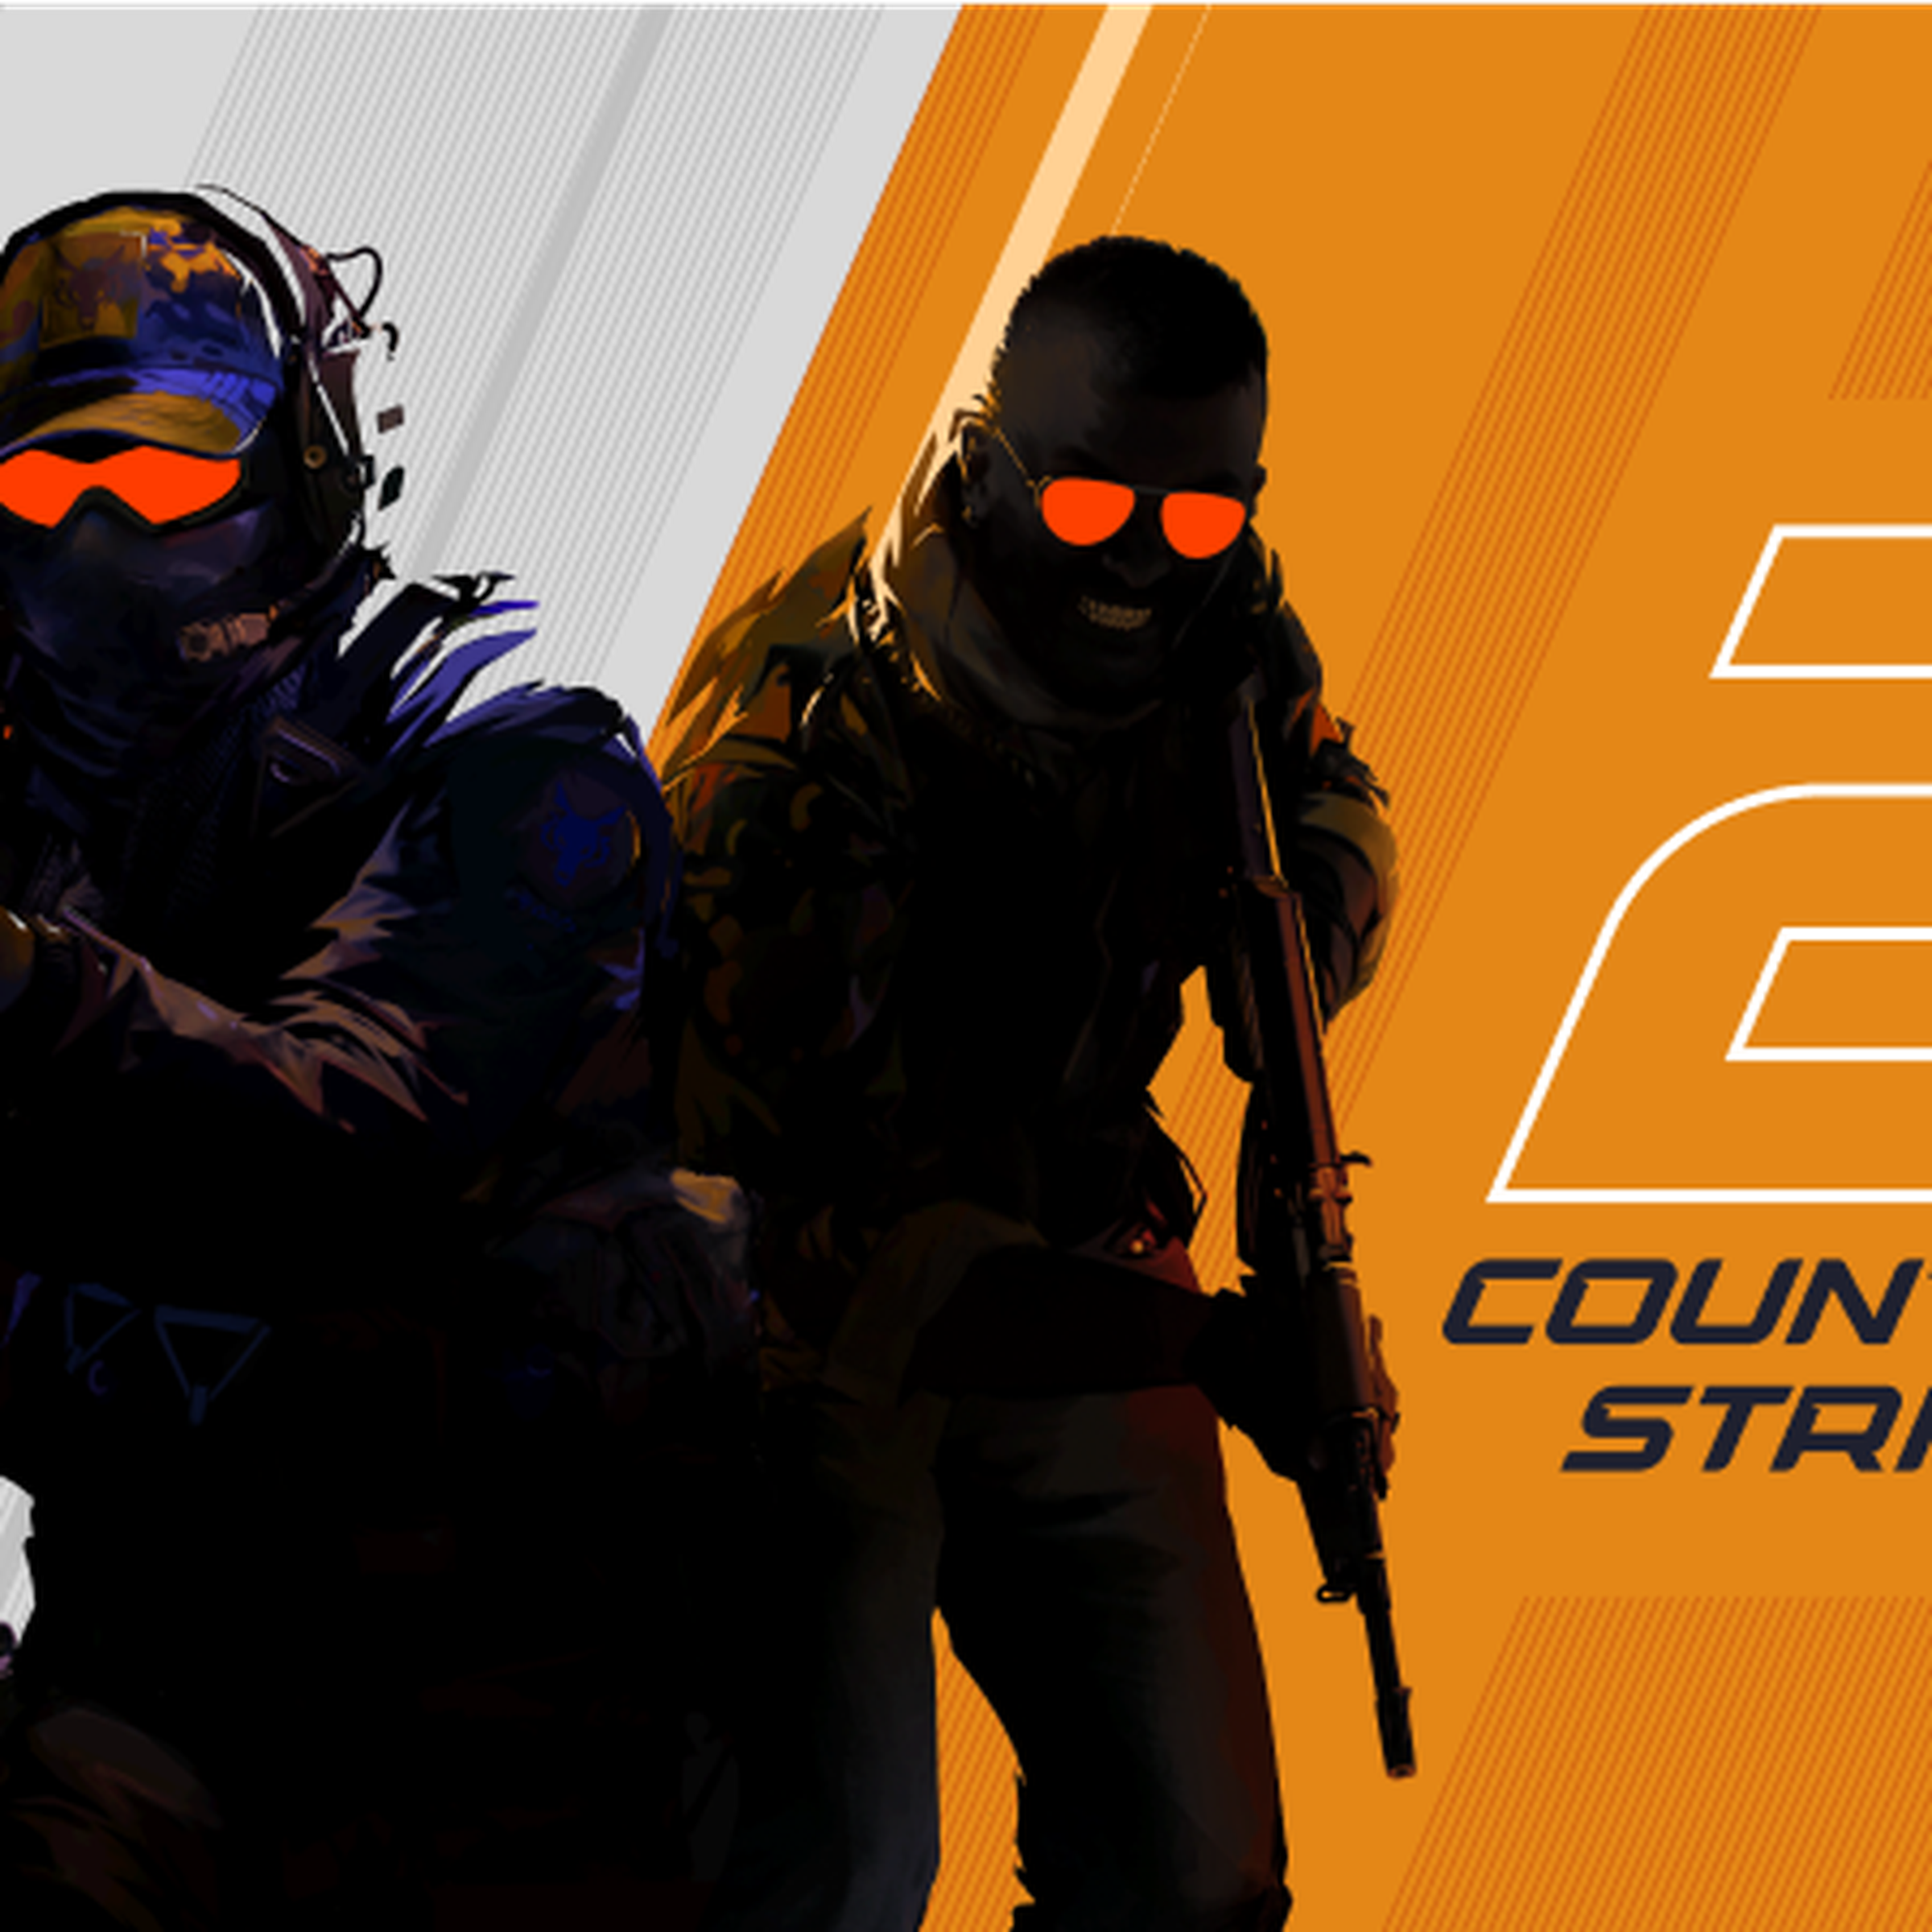 A promotional image for Counter-Strike 2.